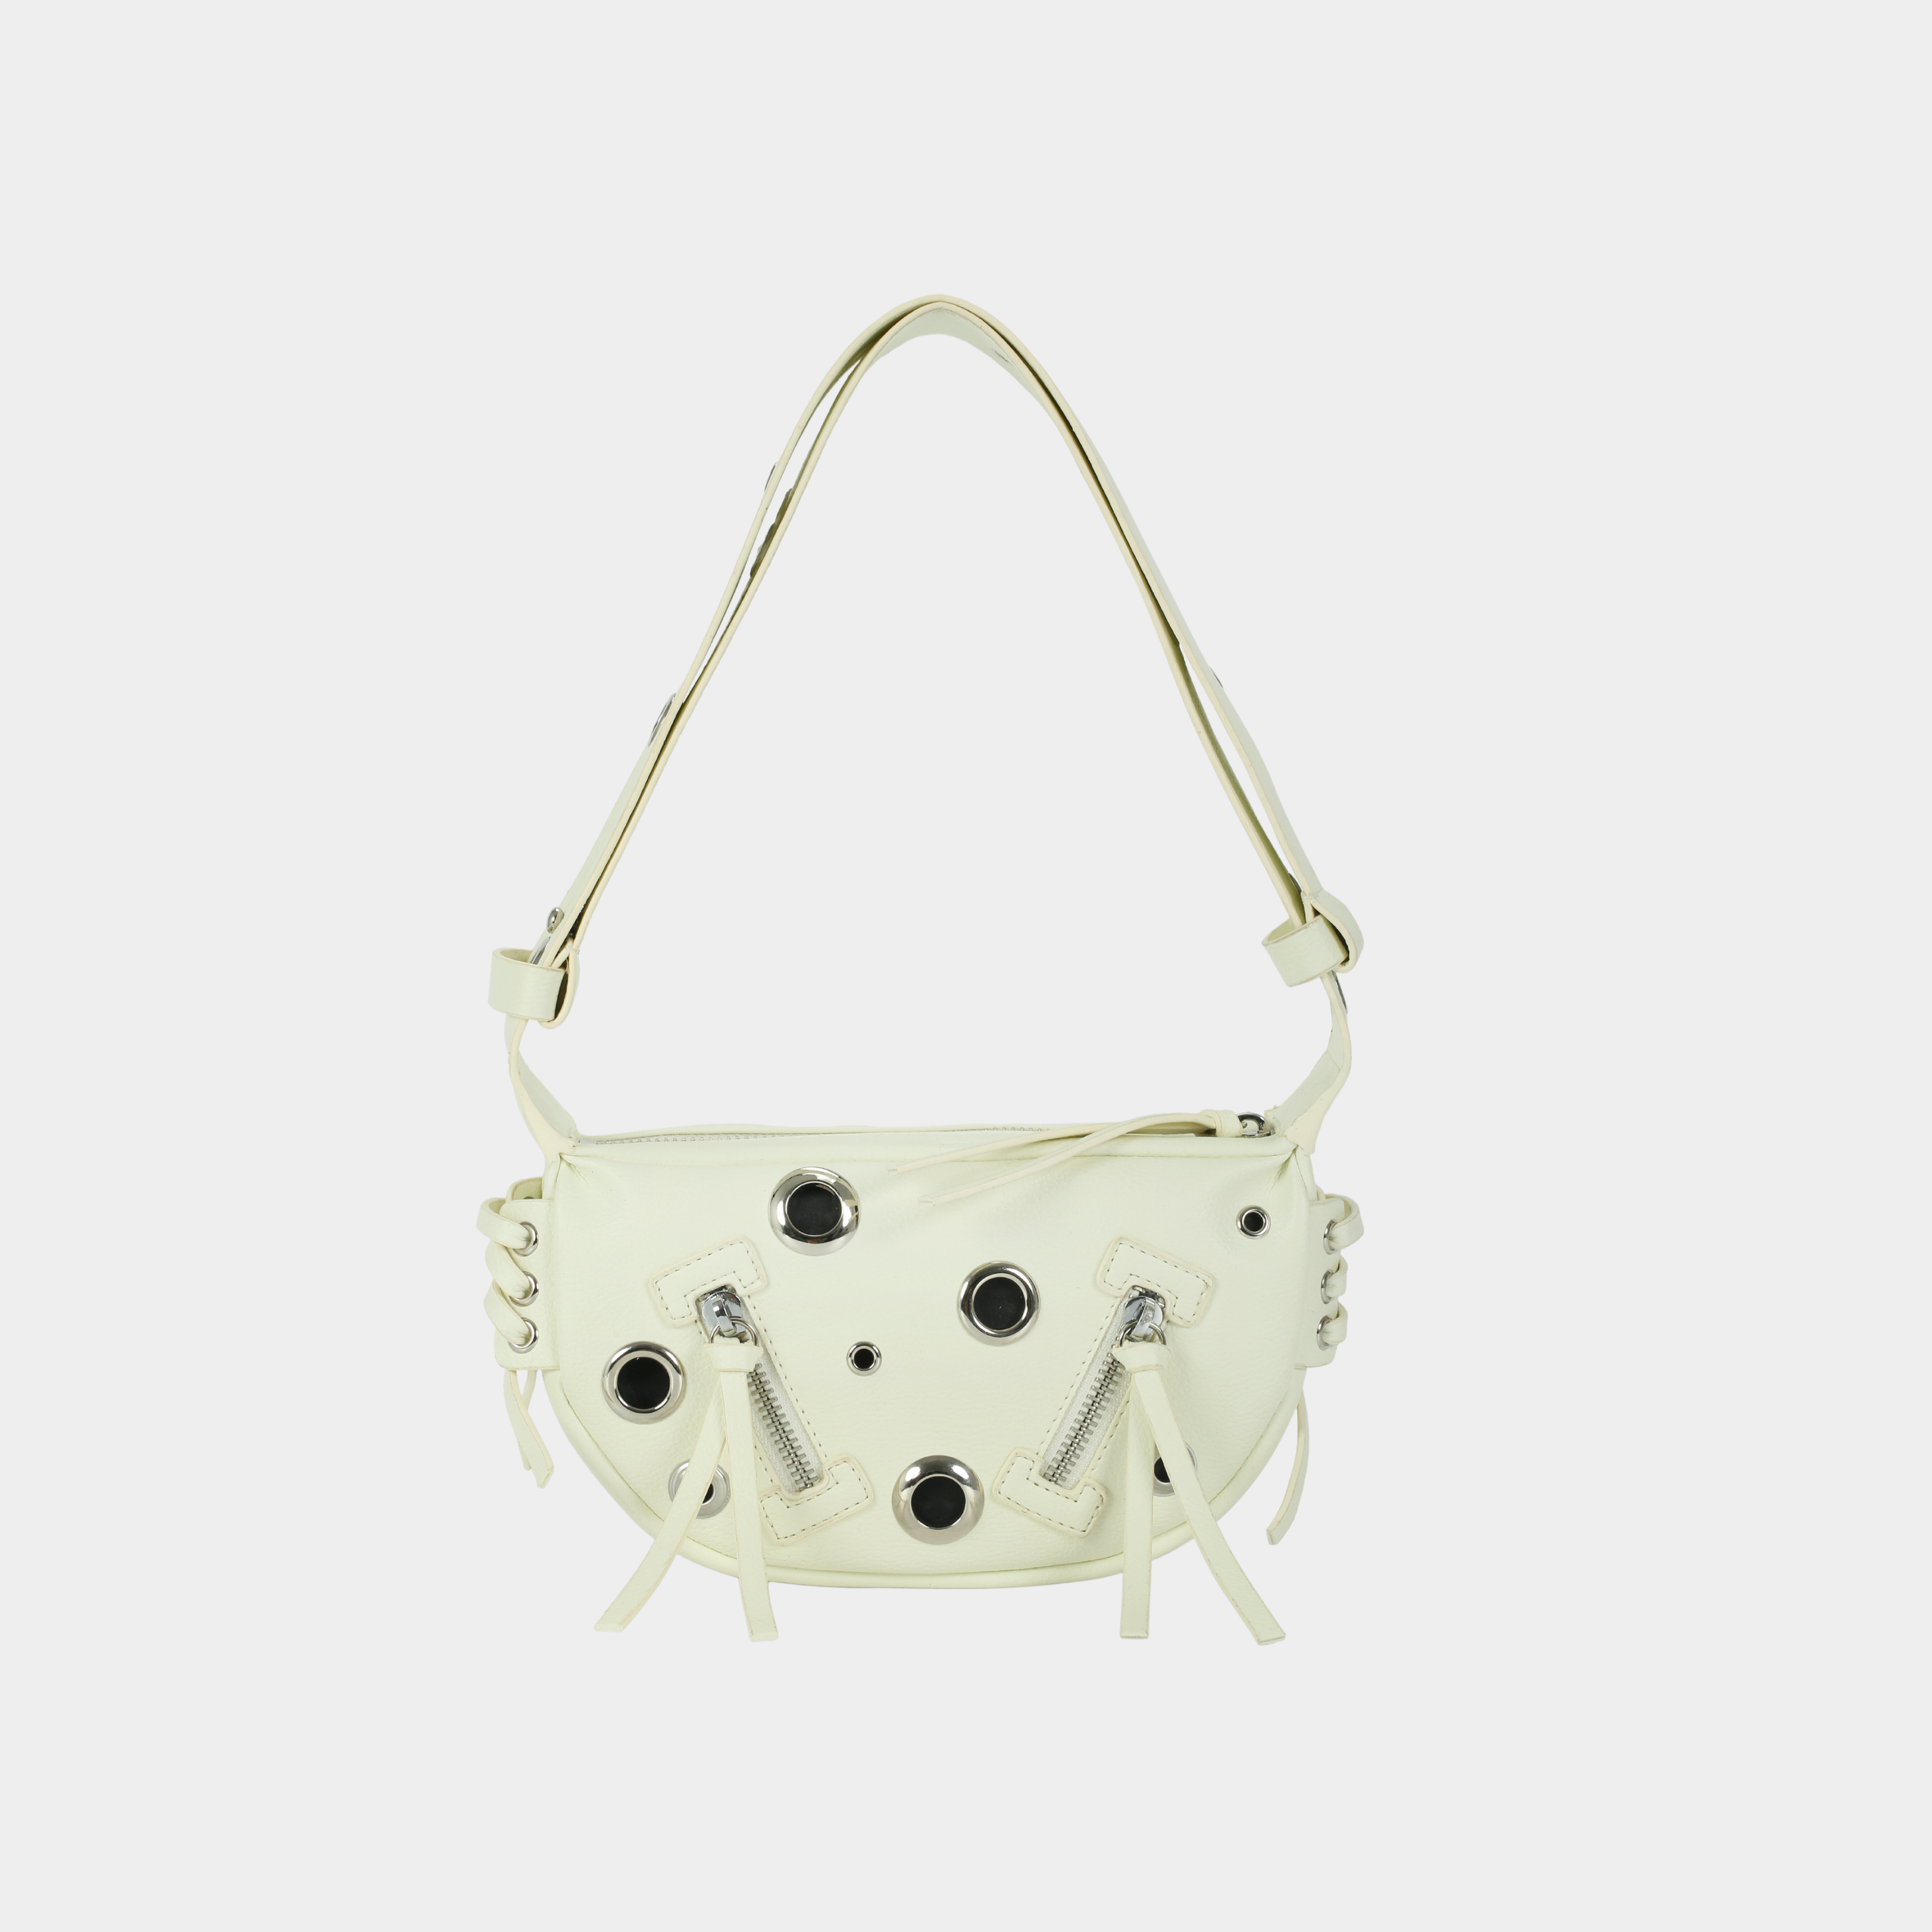 LACE EYELET bag small size (S) white color